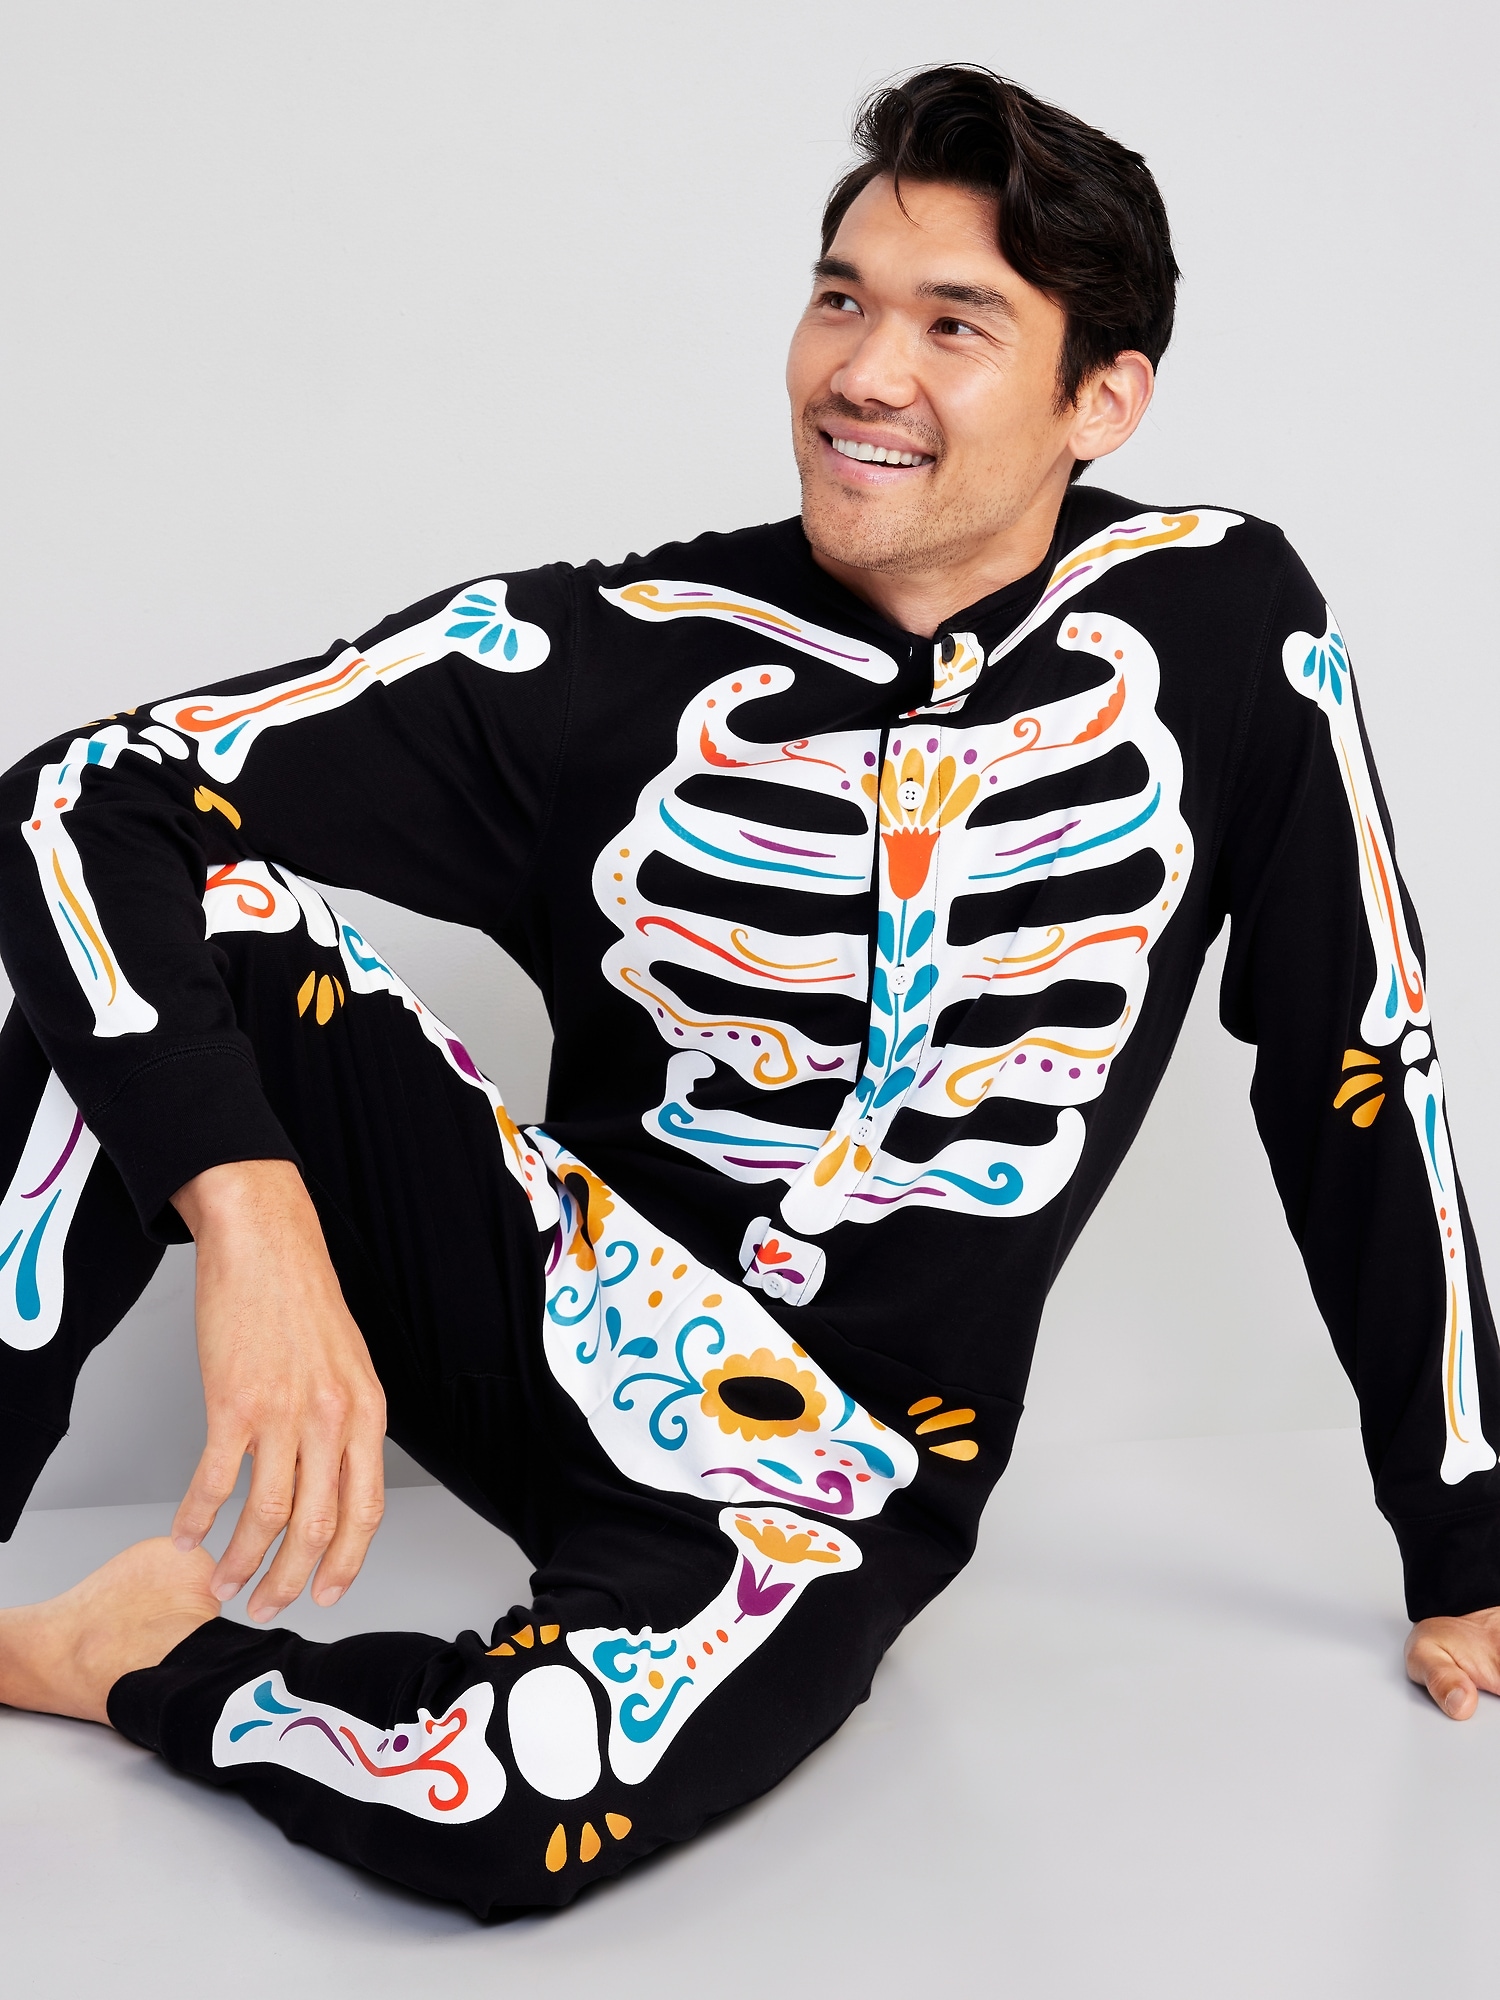 Matching Halloween One-Piece Pajamas for Men | Old Navy